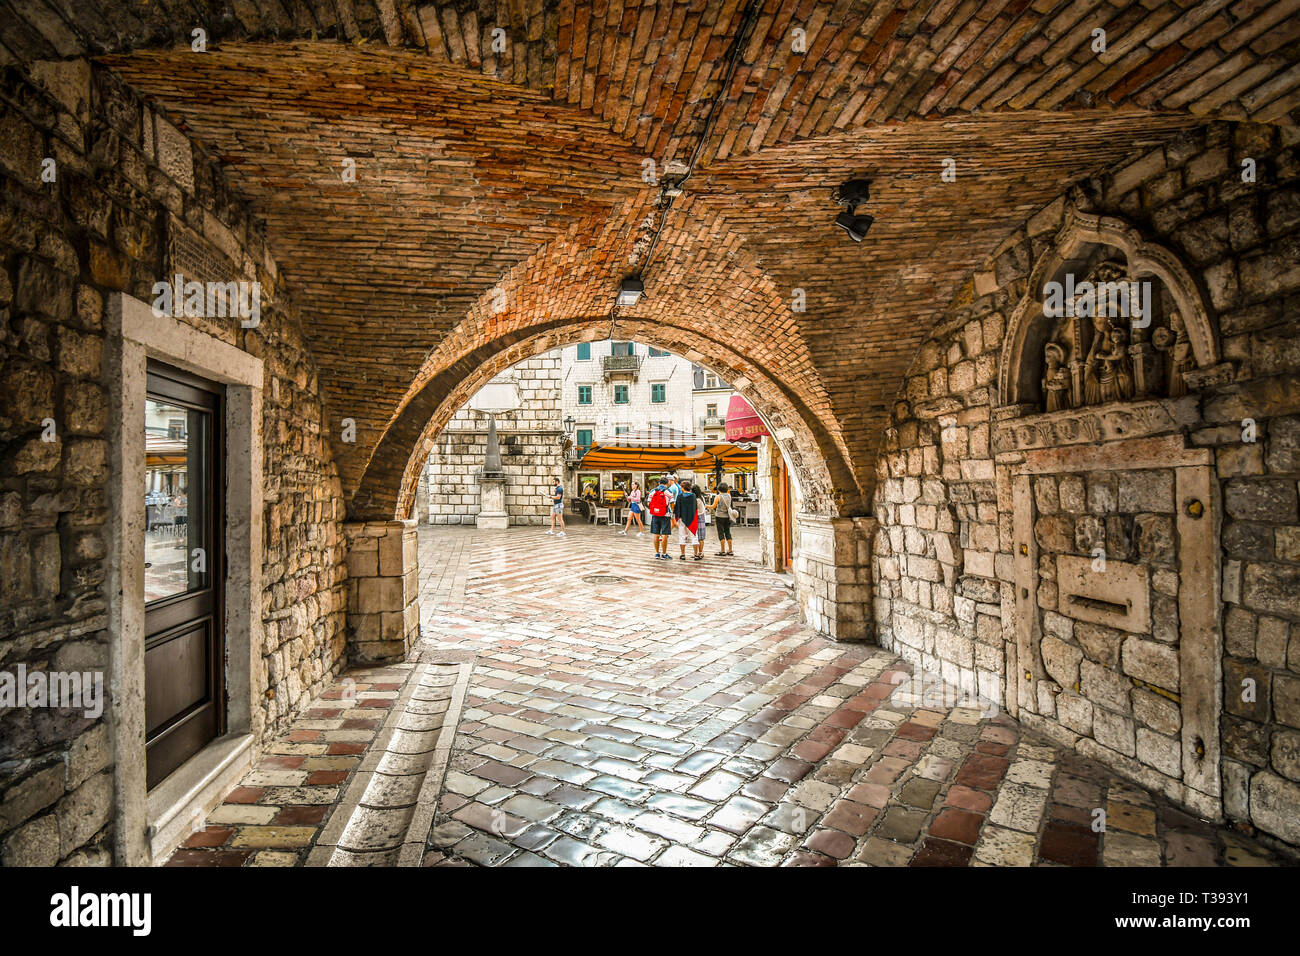 The Square of the Arms opens out in front as tourists enter the gated, walled medieval fortress town of Kotor, Montenegro through it's tunnel entrance Stock Photo